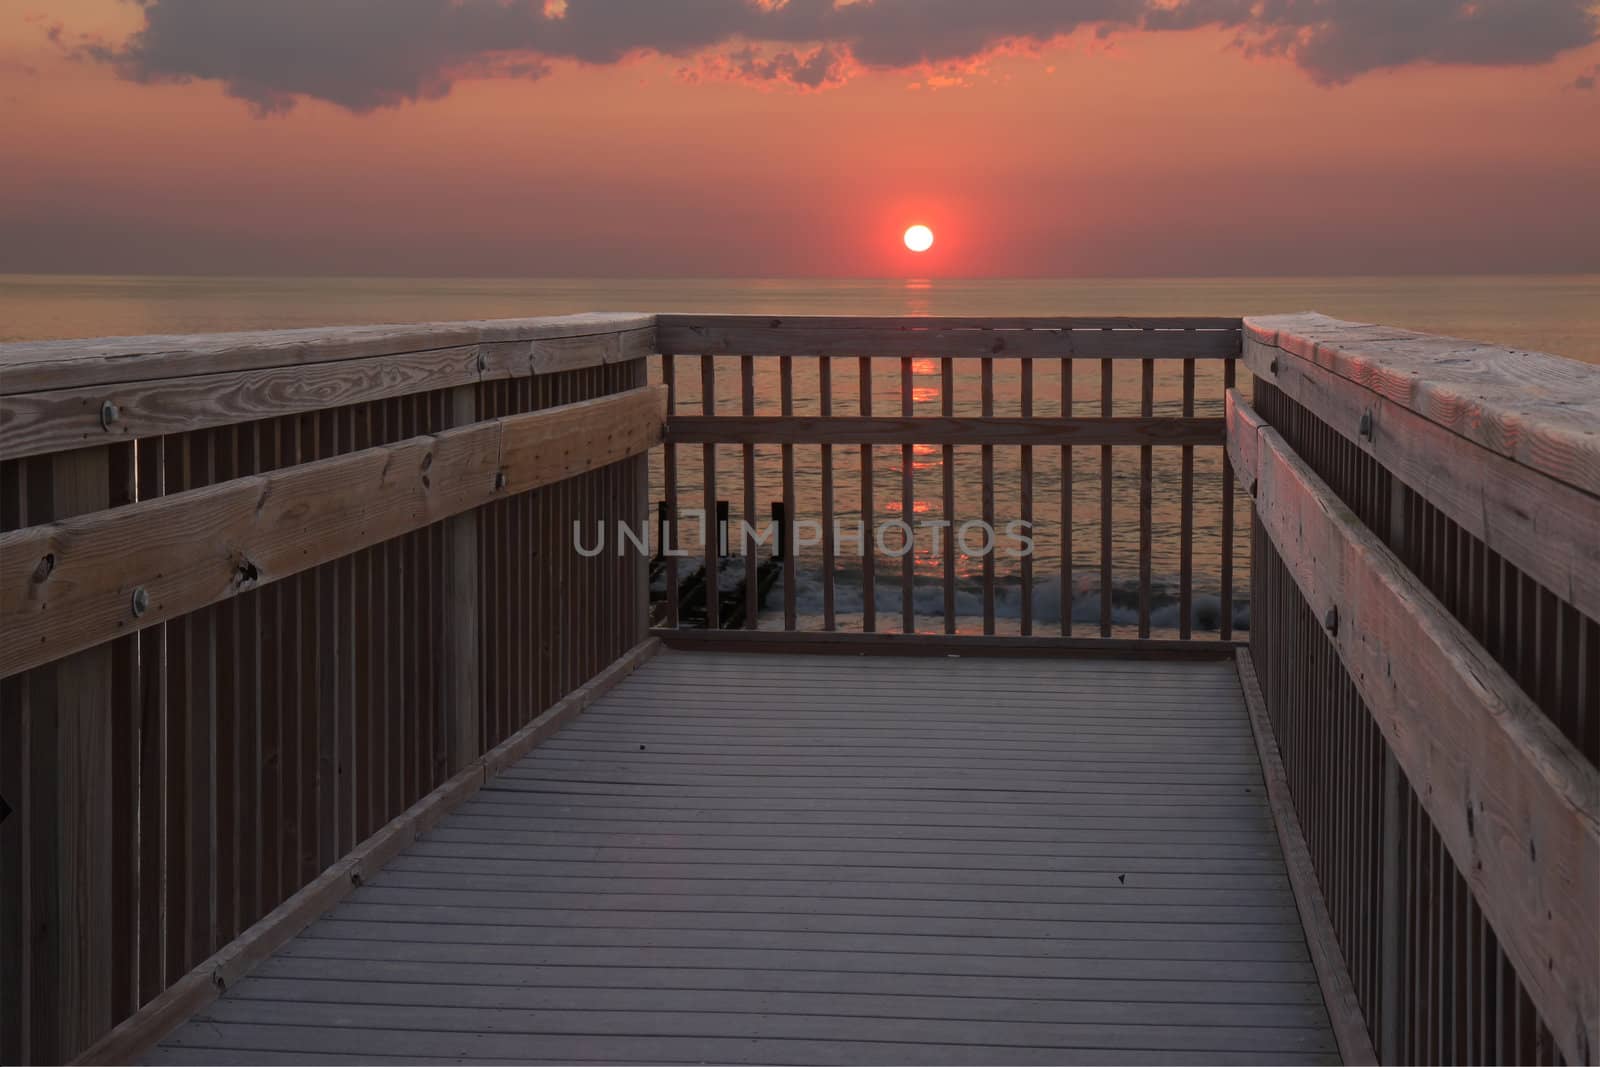 The sun is just above the horizon over the Atlantic ocean in early morning at a public beach access in Nags Head, North Carolina